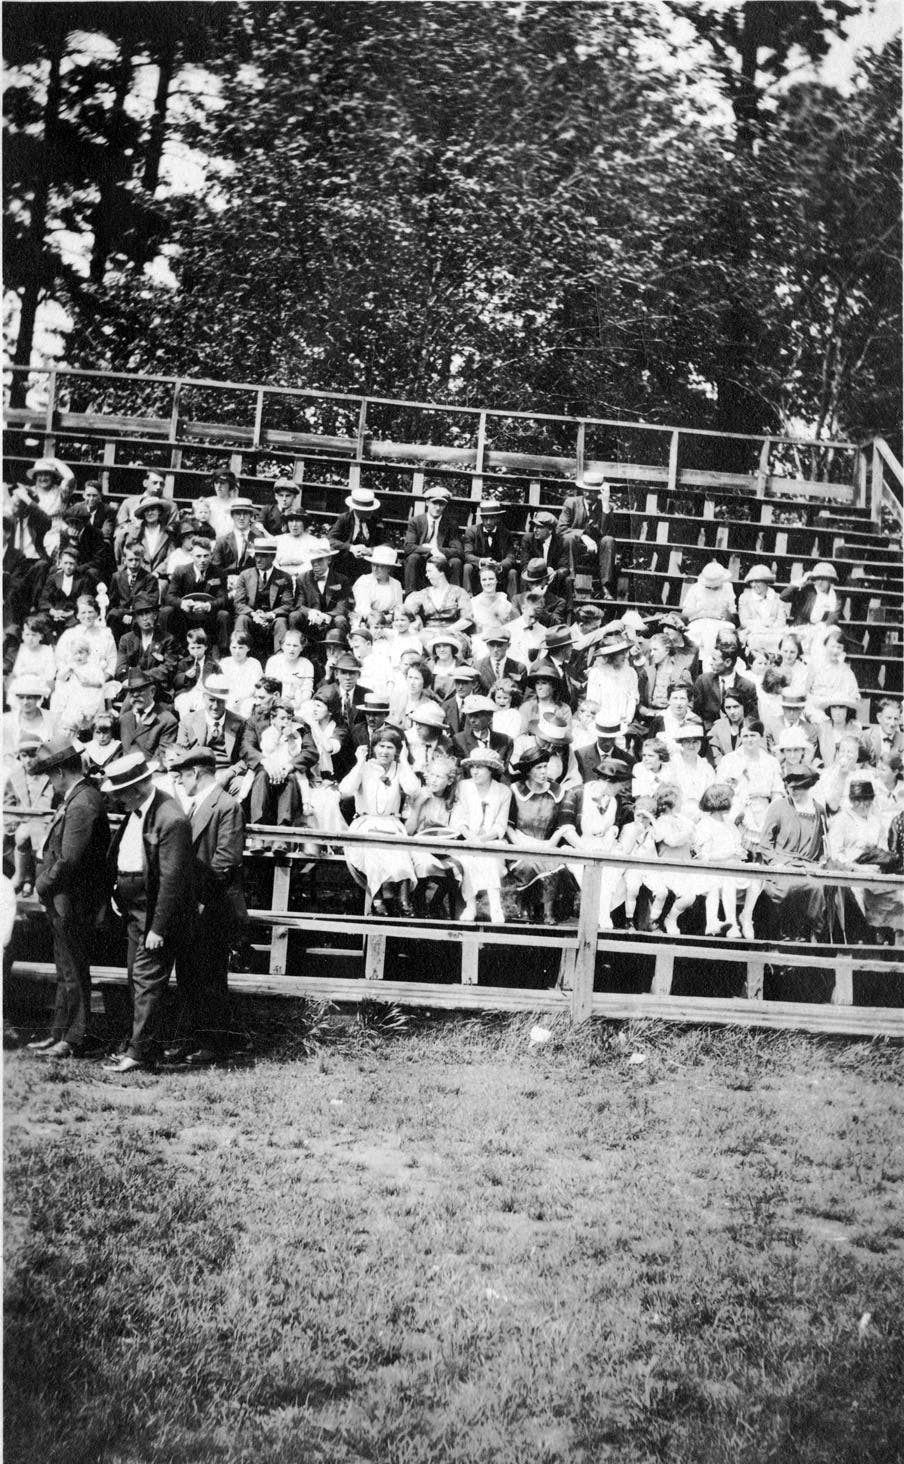 Crowds in the grandstands on the grounds of the Lorne Park amusement complex